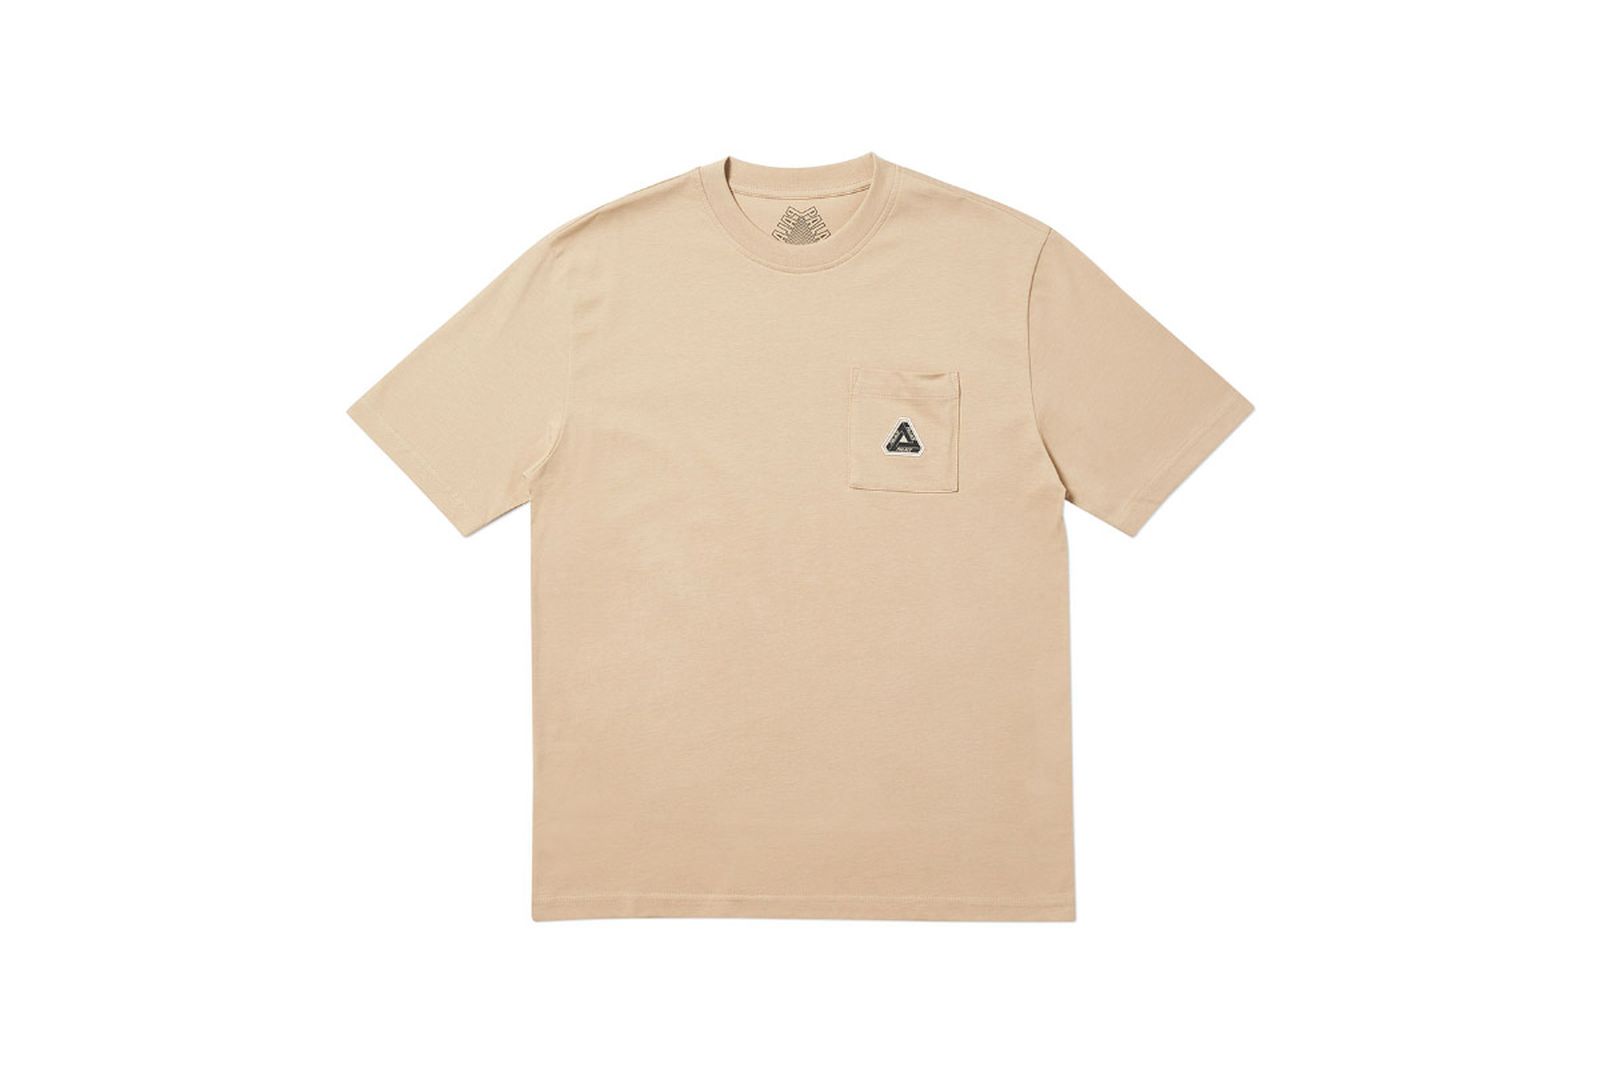 Palace Fall 2019: Every T-Shirt & Longsleeve in the Collection